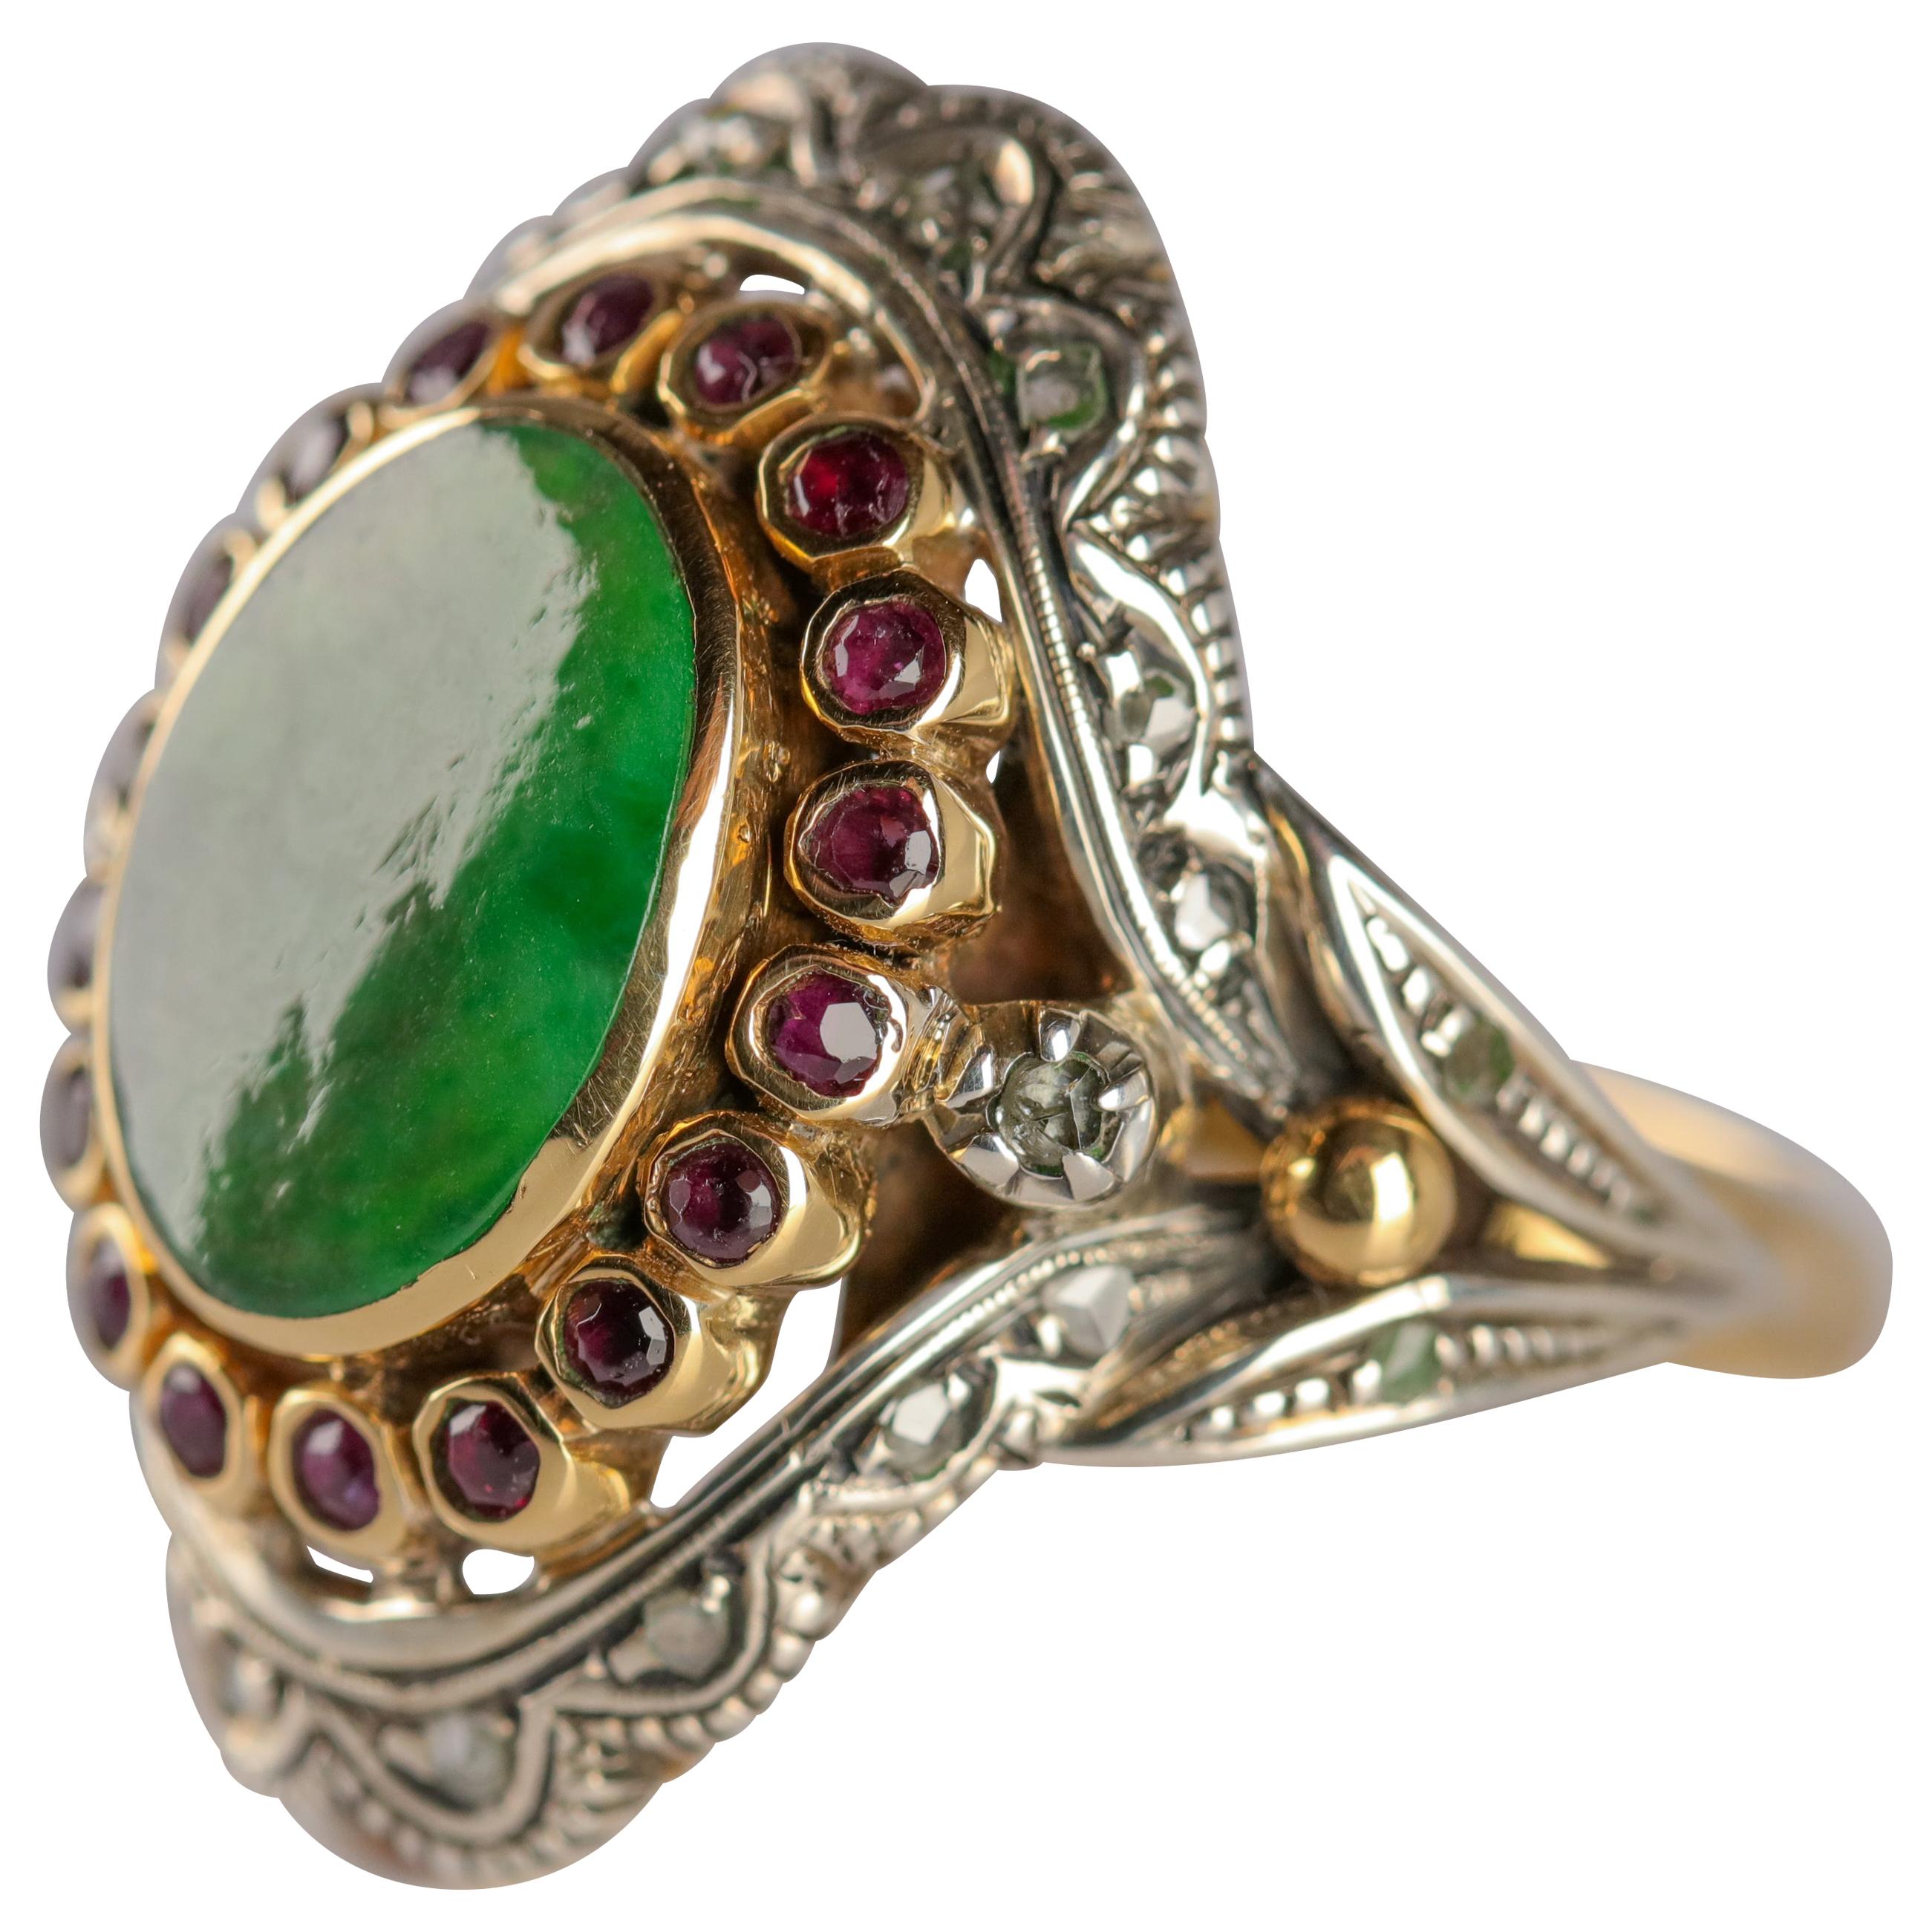 Antique Jade Ring with Rubies & Diamonds in Gold and Silver Eccentric and Ornate